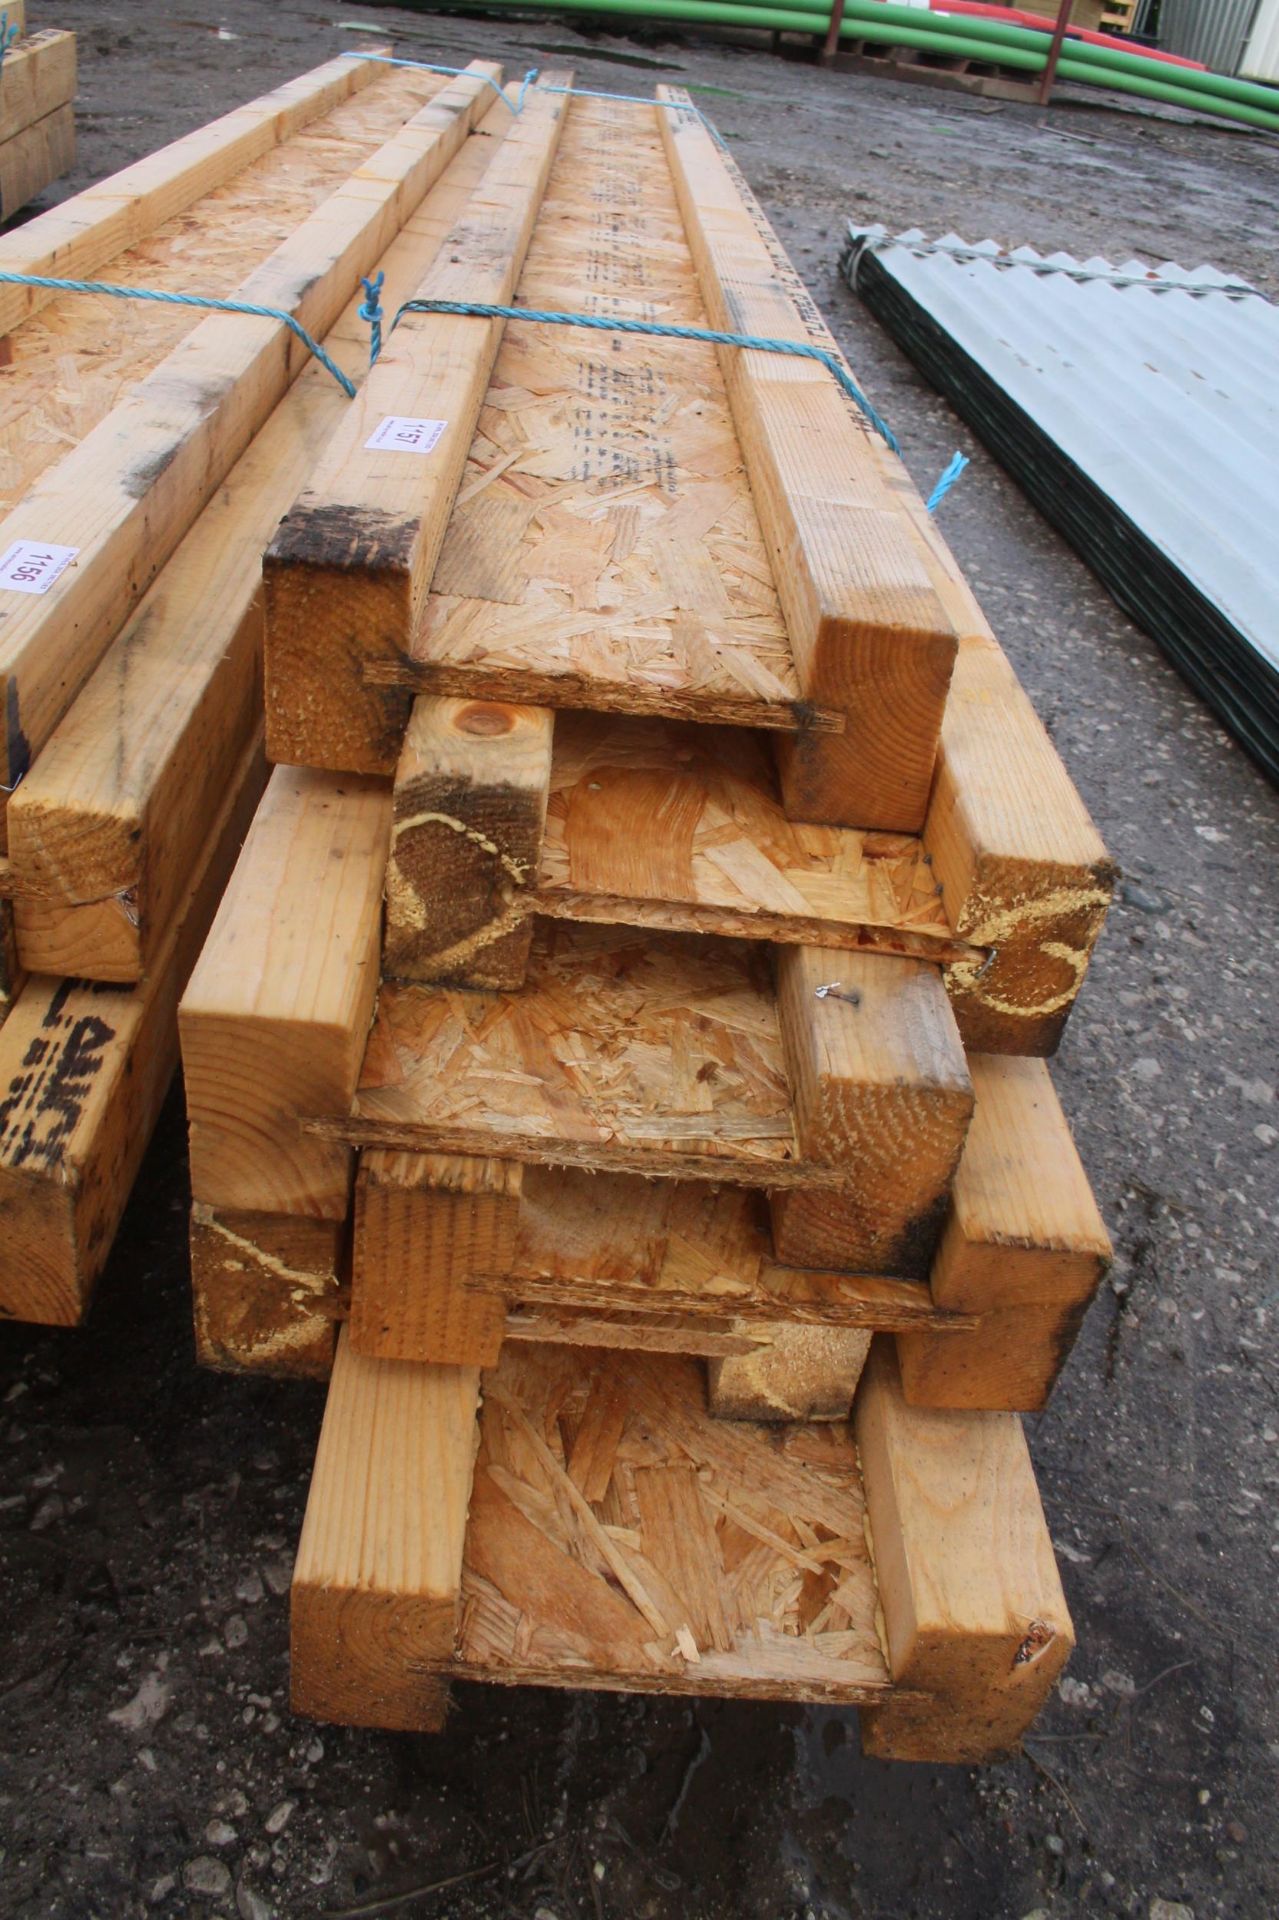 6 WOODEN BEAMS FROM 7 FT + VAT